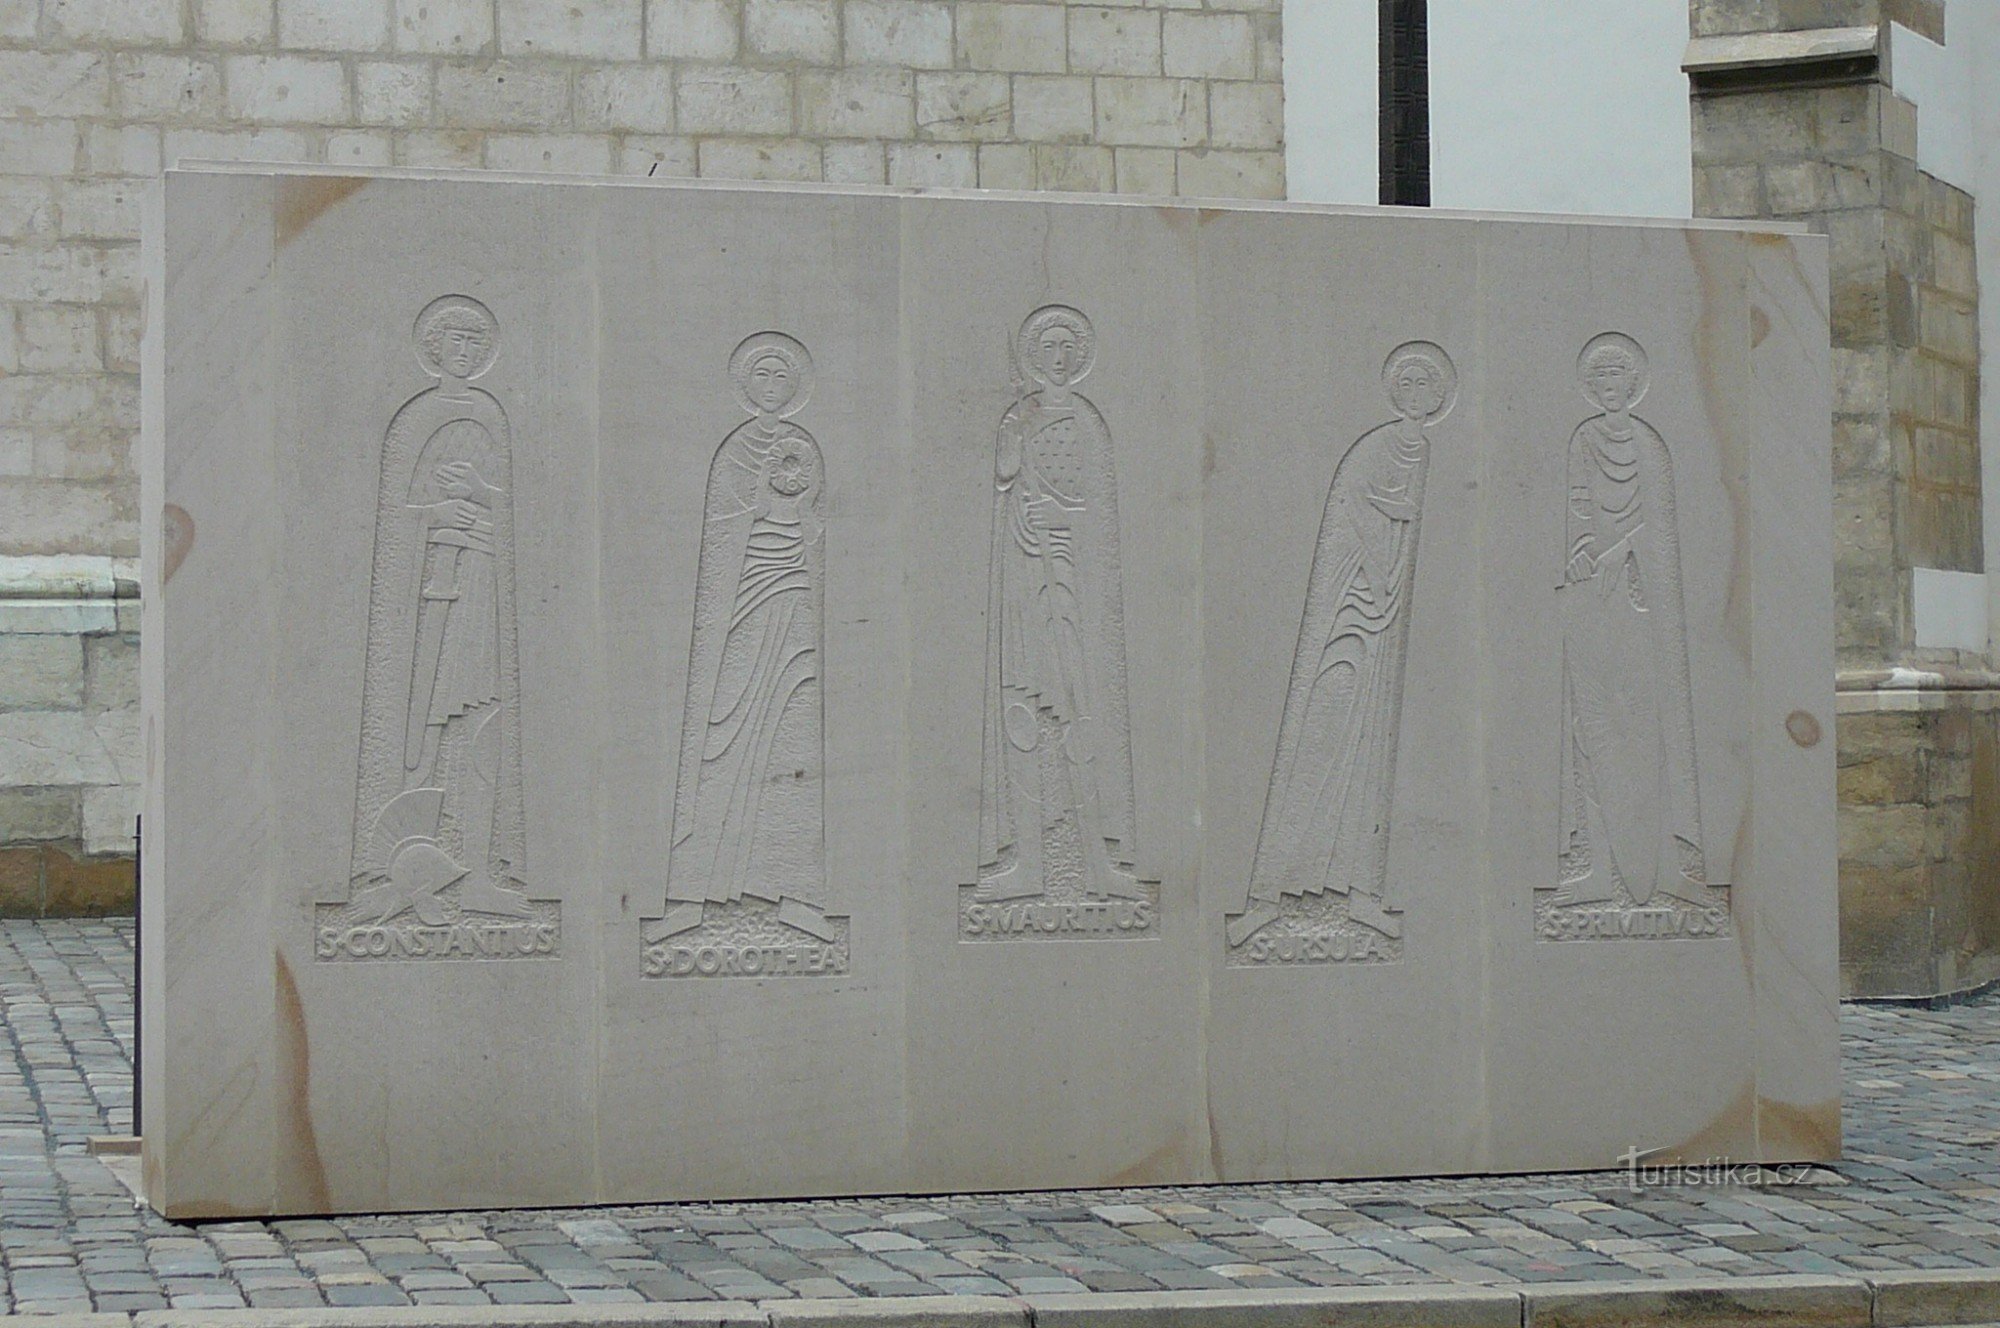 The back part of the entrance wall with the depiction of the five saints who have a connection with the bone